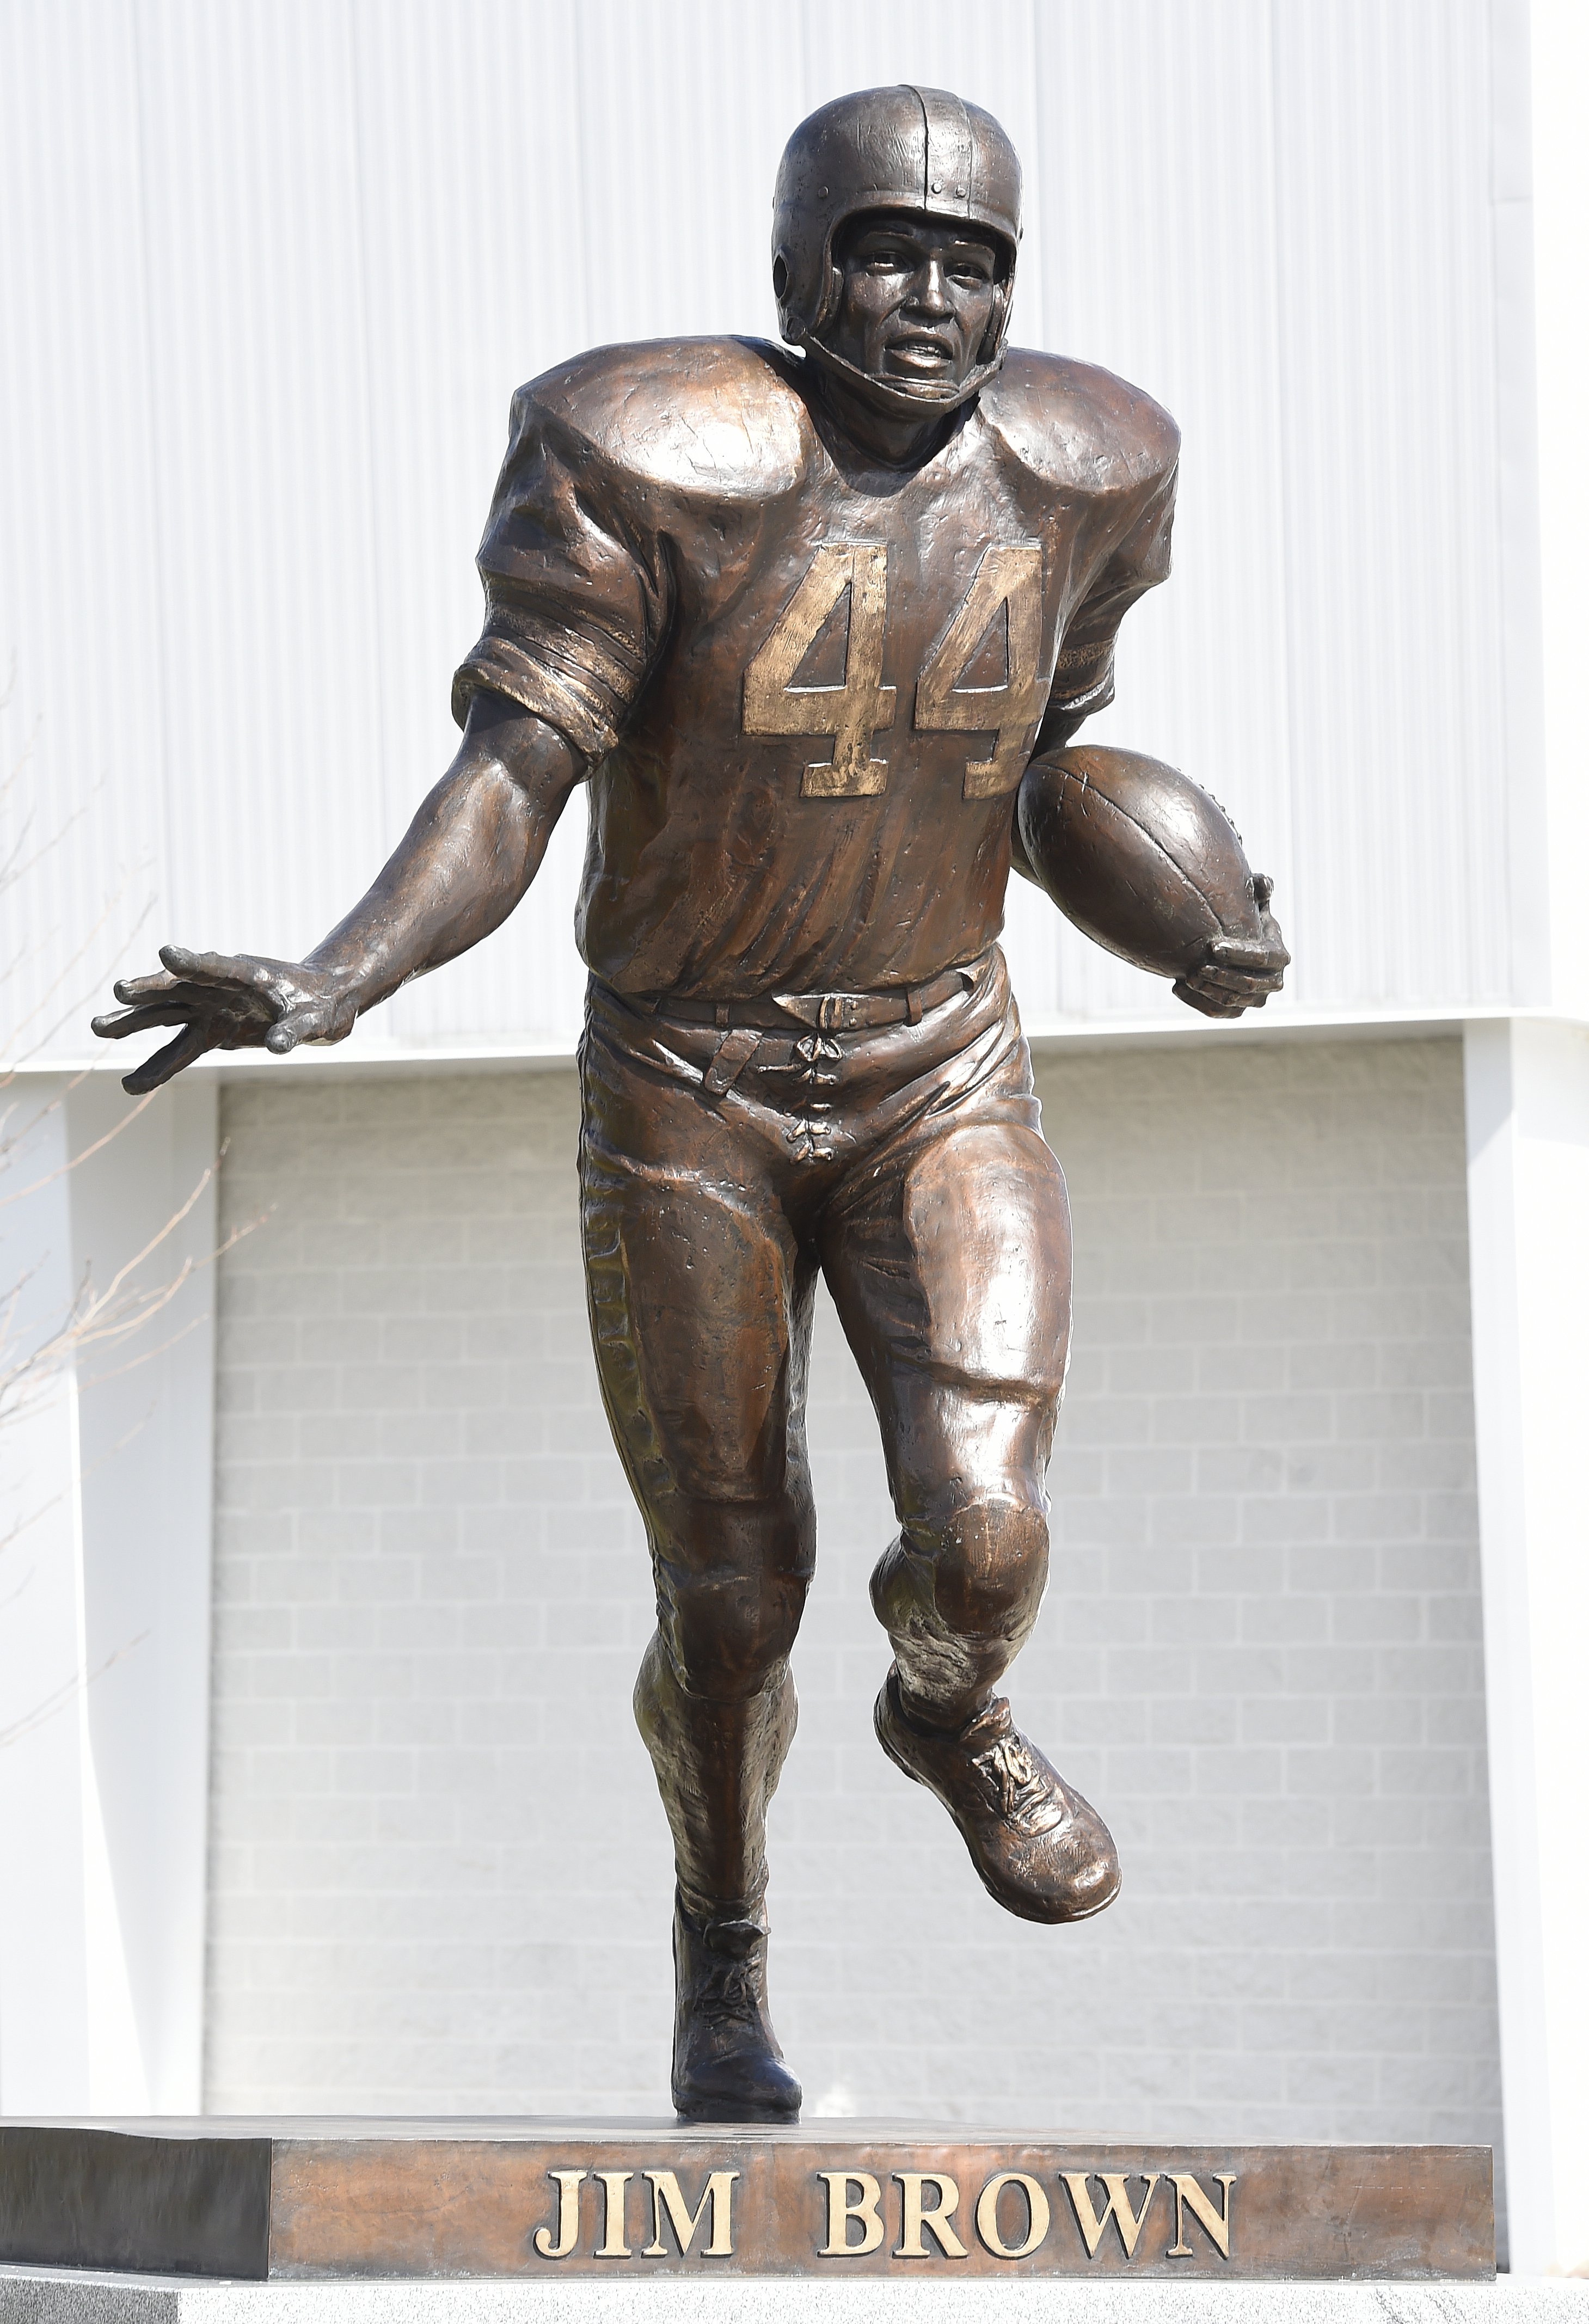 This is the statue of Jim Brown installed on the courtyard of the Clifford J. Ensley Athletic Center, Syracuse University. Brown, not only played football for Syracuse, he also excelled in lacrosse, basketball and track.

Ellen M. Blalock | eblalock@syracuse.com